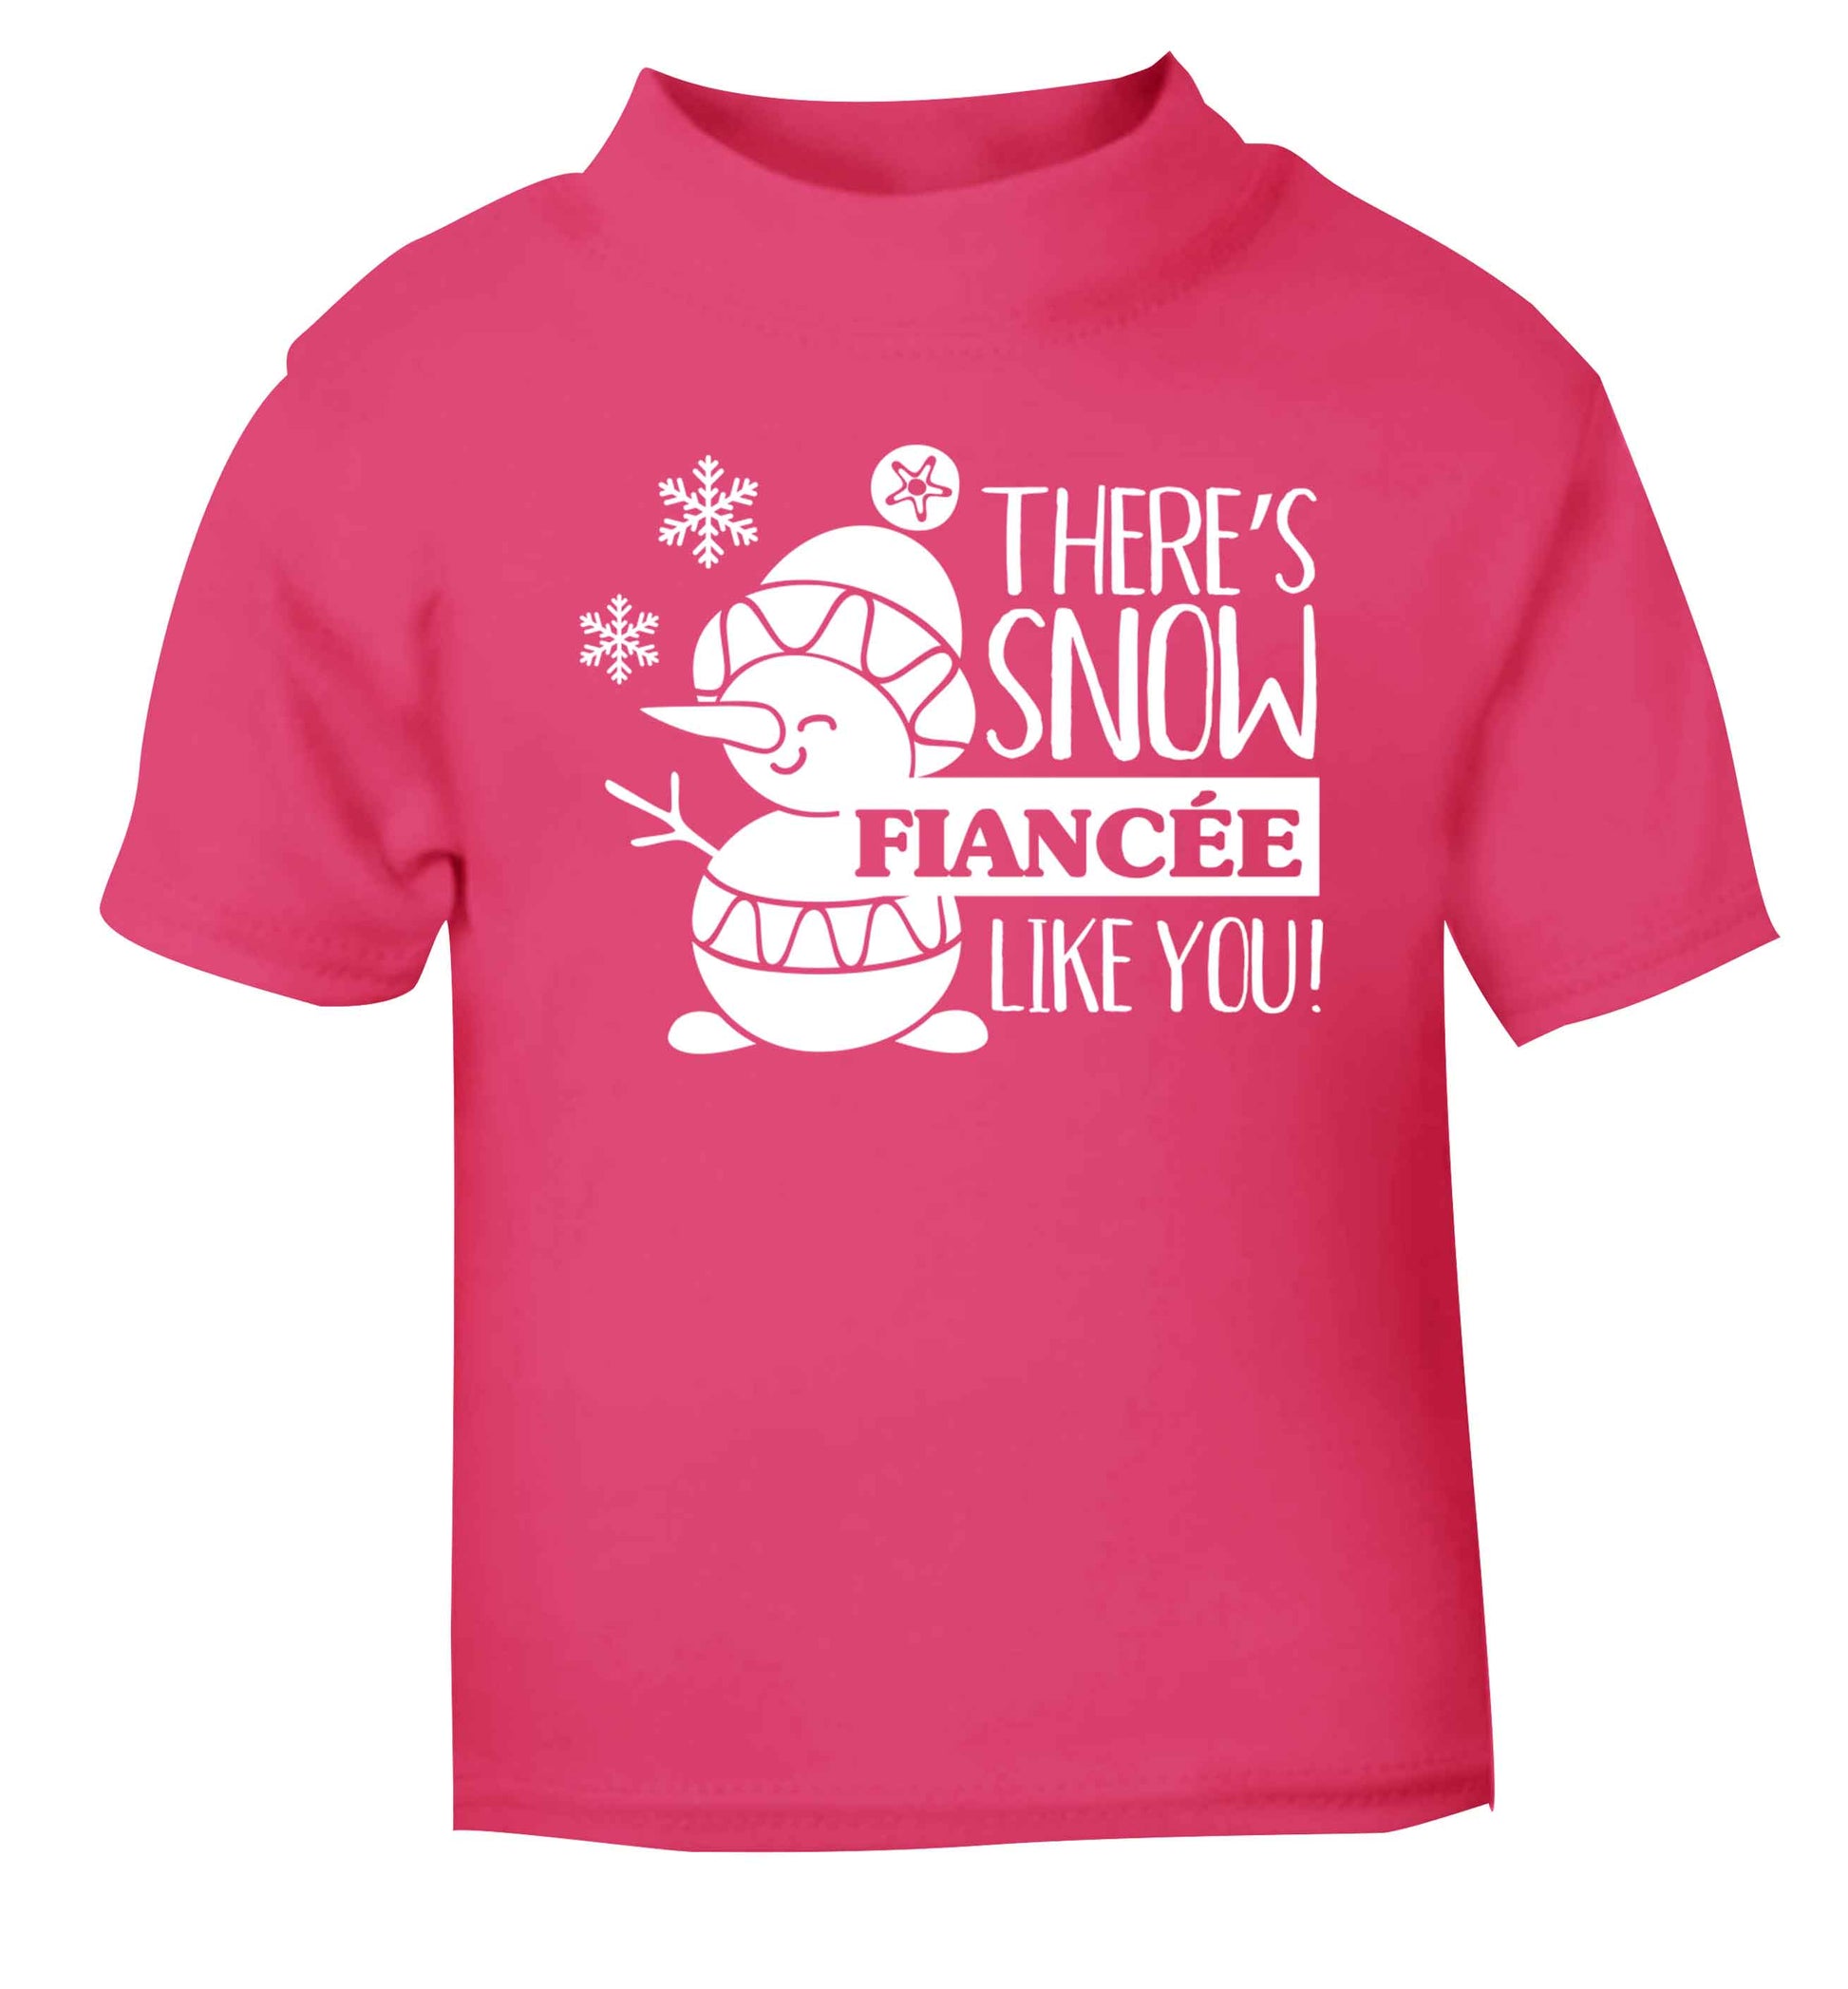 There's snow fiancee like you pink baby toddler Tshirt 2 Years